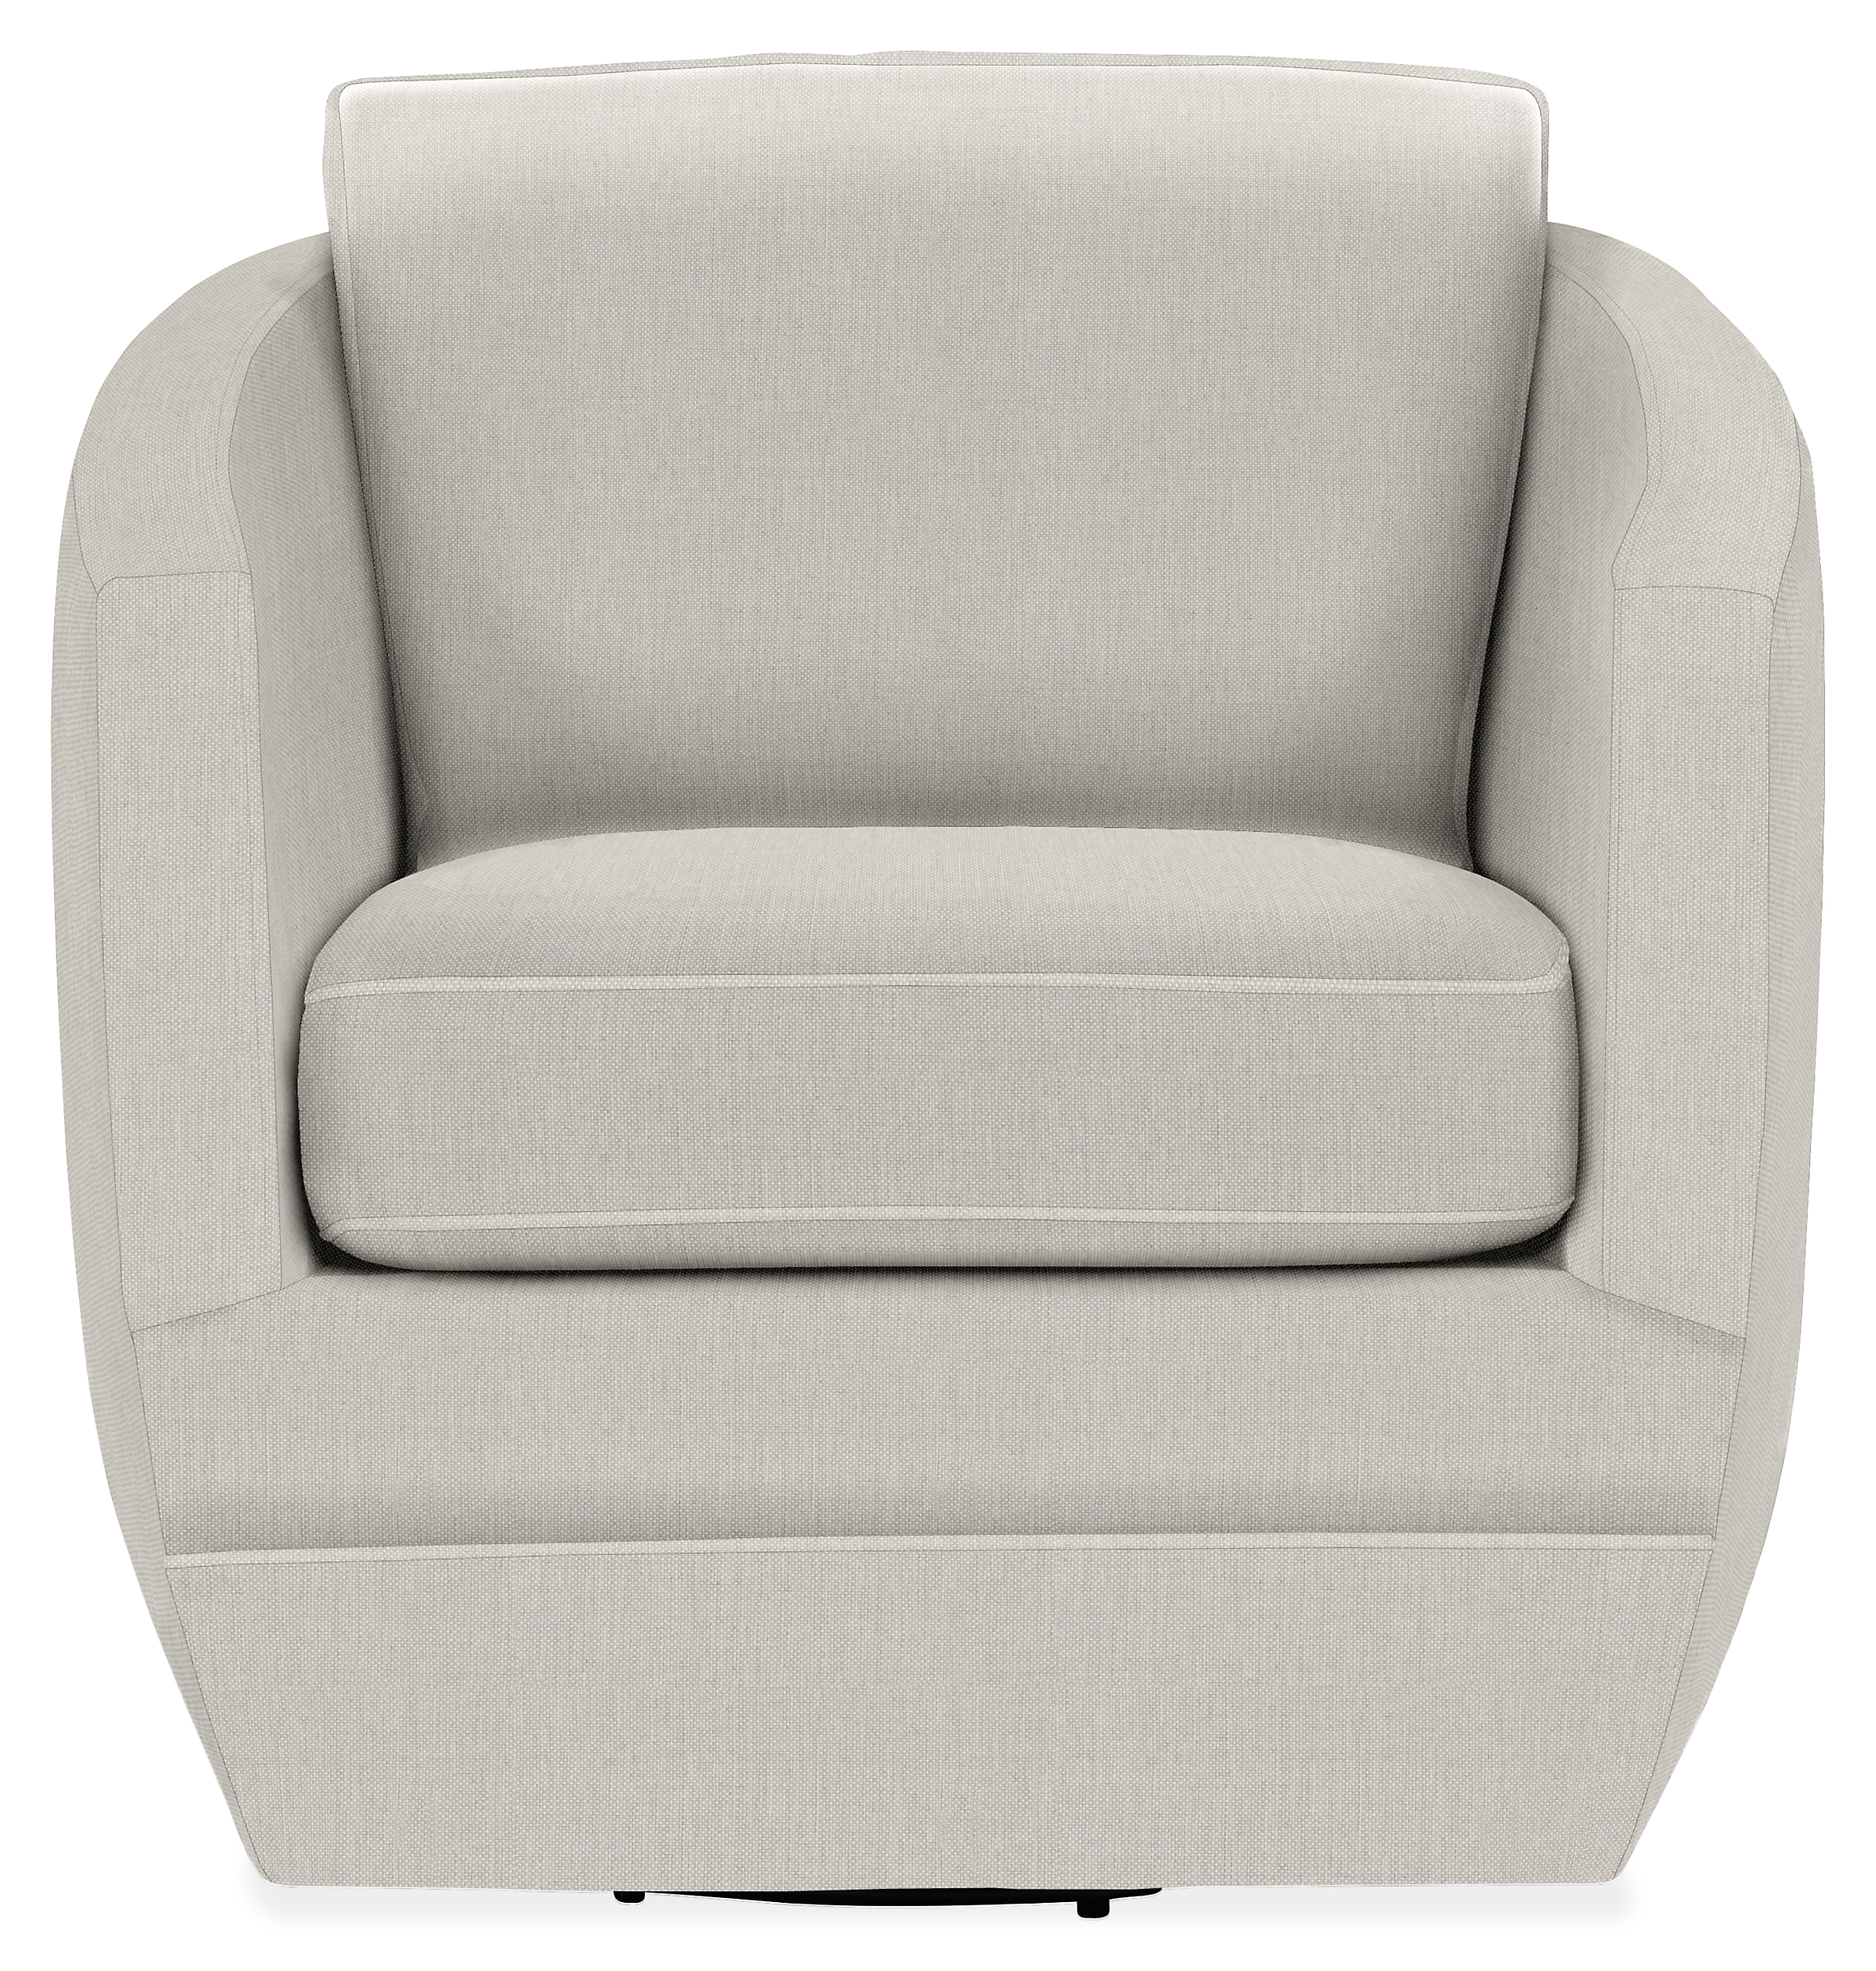 Front view of Sunford Swivel Chair in Mist Grey.